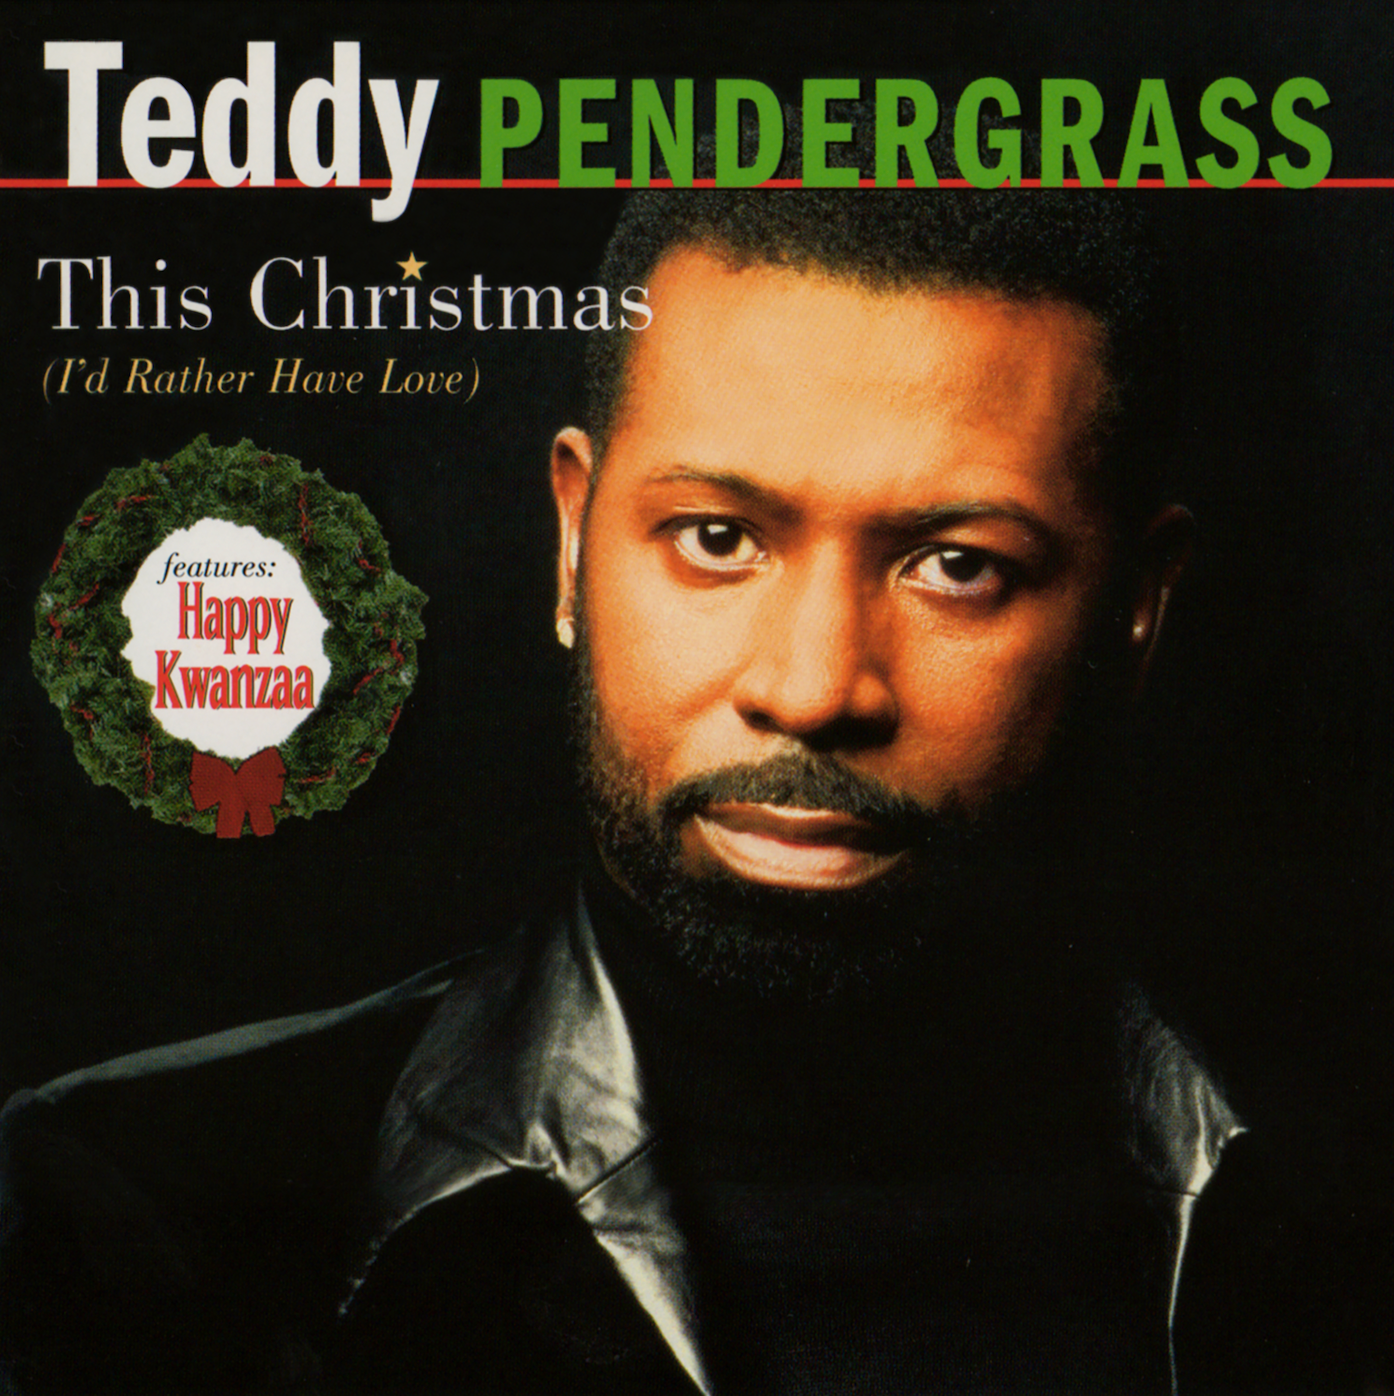 TEDDY PENDERGRASS’ THIS CHRISTMAS (I’D RATHER HAVE LOVE) TO MAKE DIGITAL DEBUT ON NOVEMBER 3RD